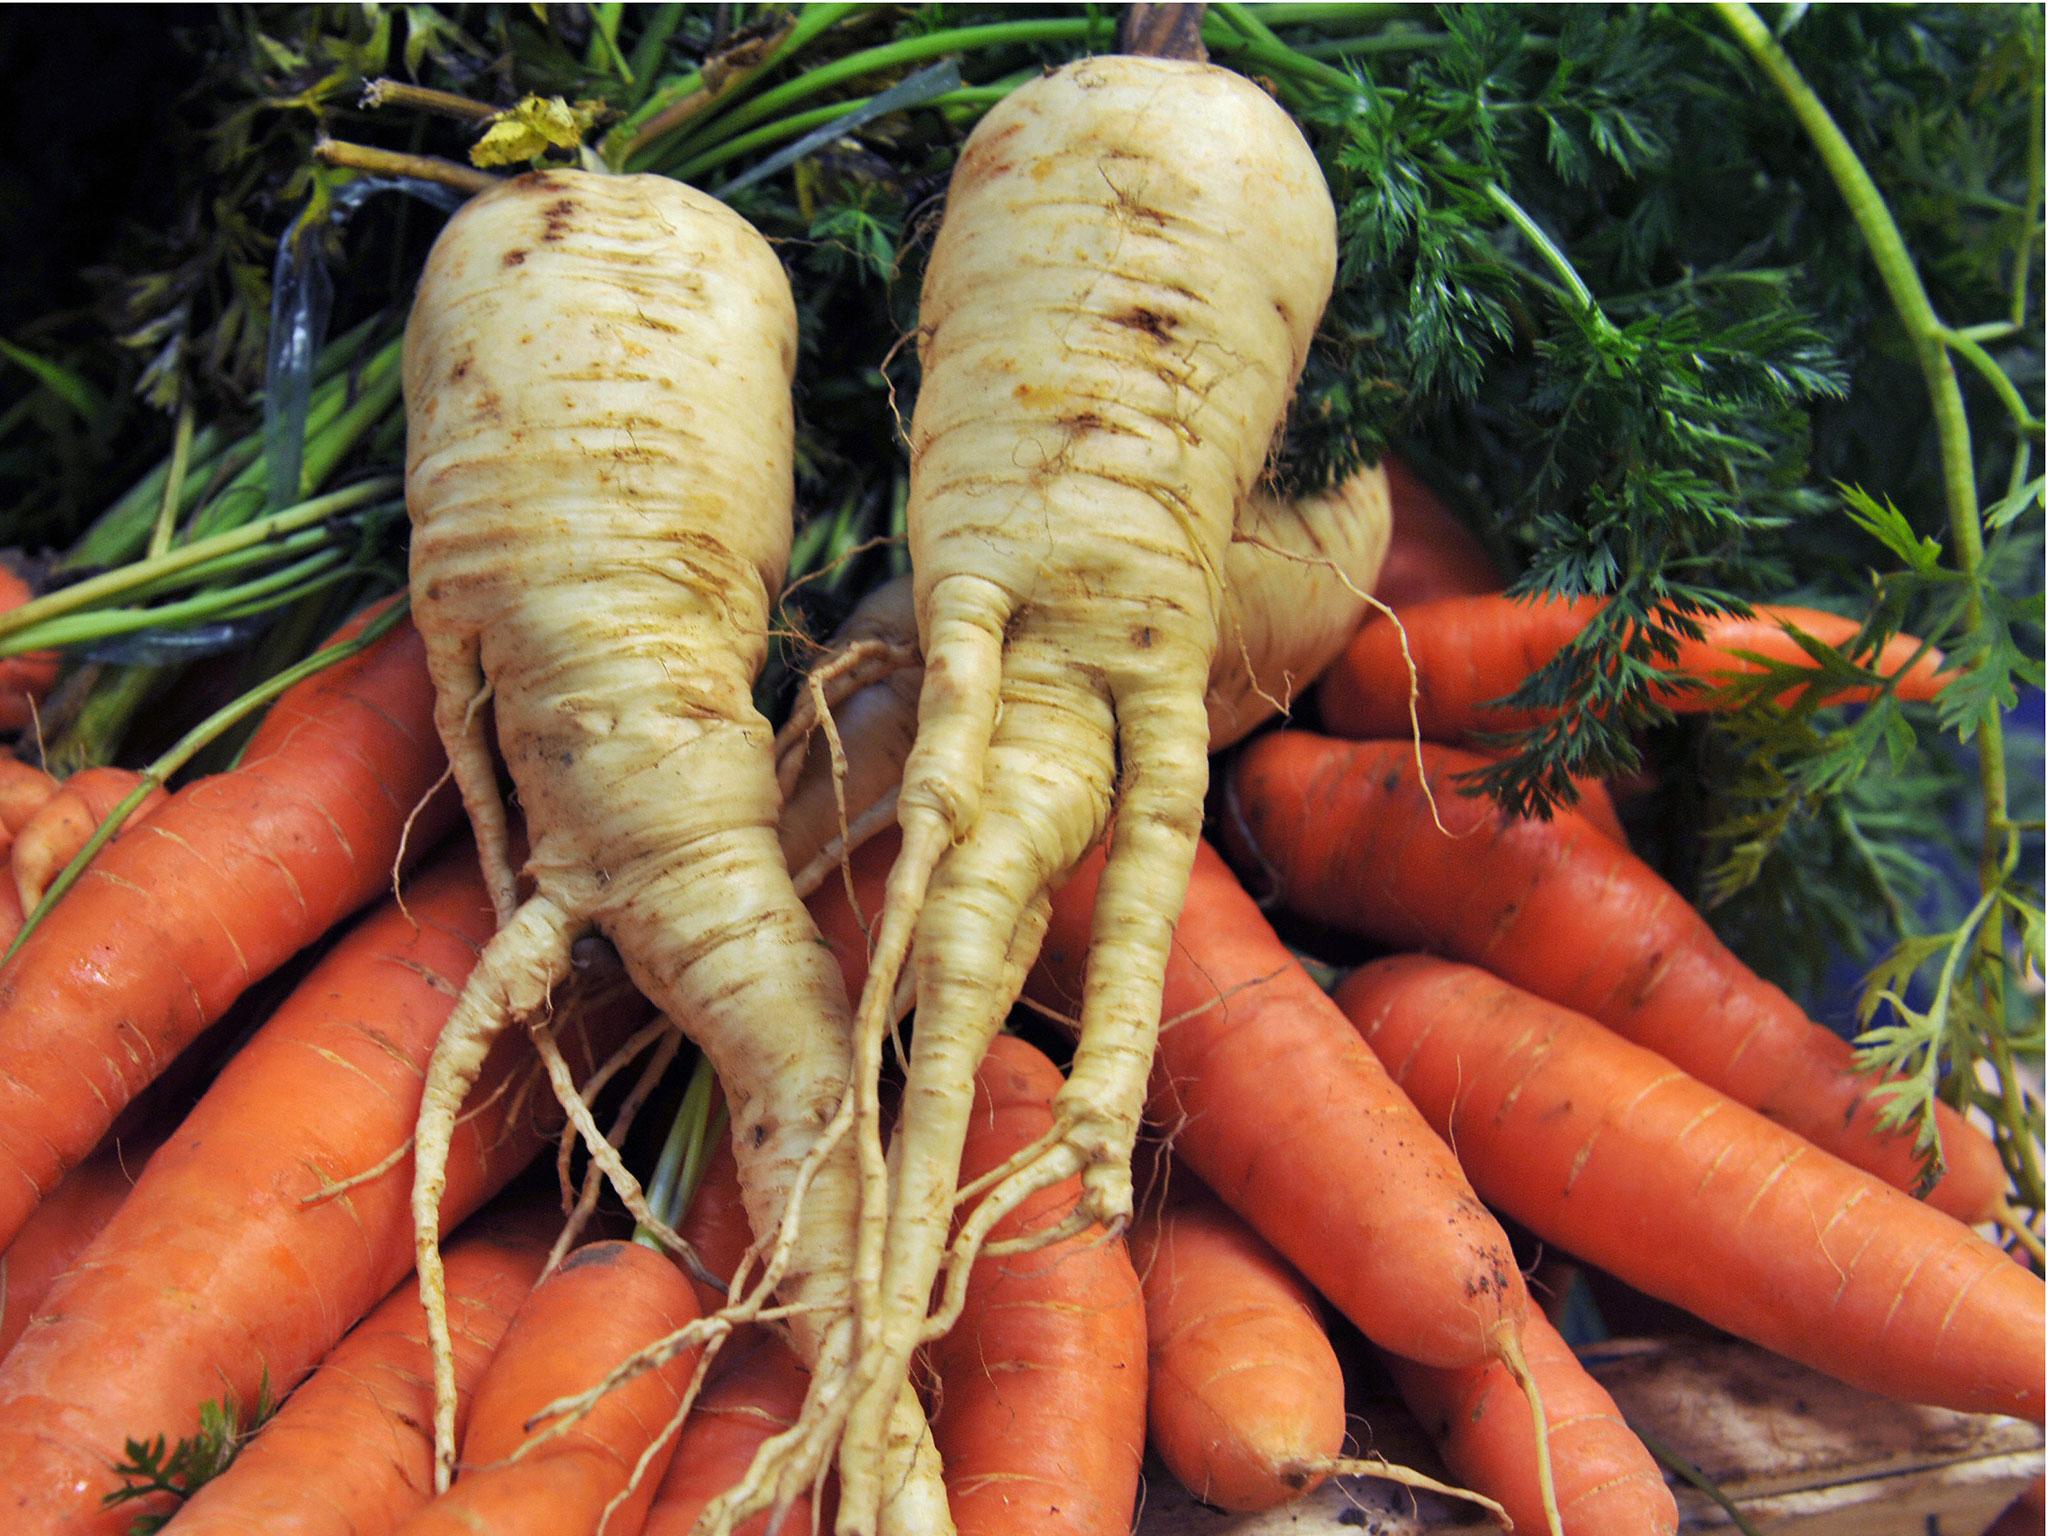 Tesco is introducing wonky veg as part of a wider effort to cut food waste